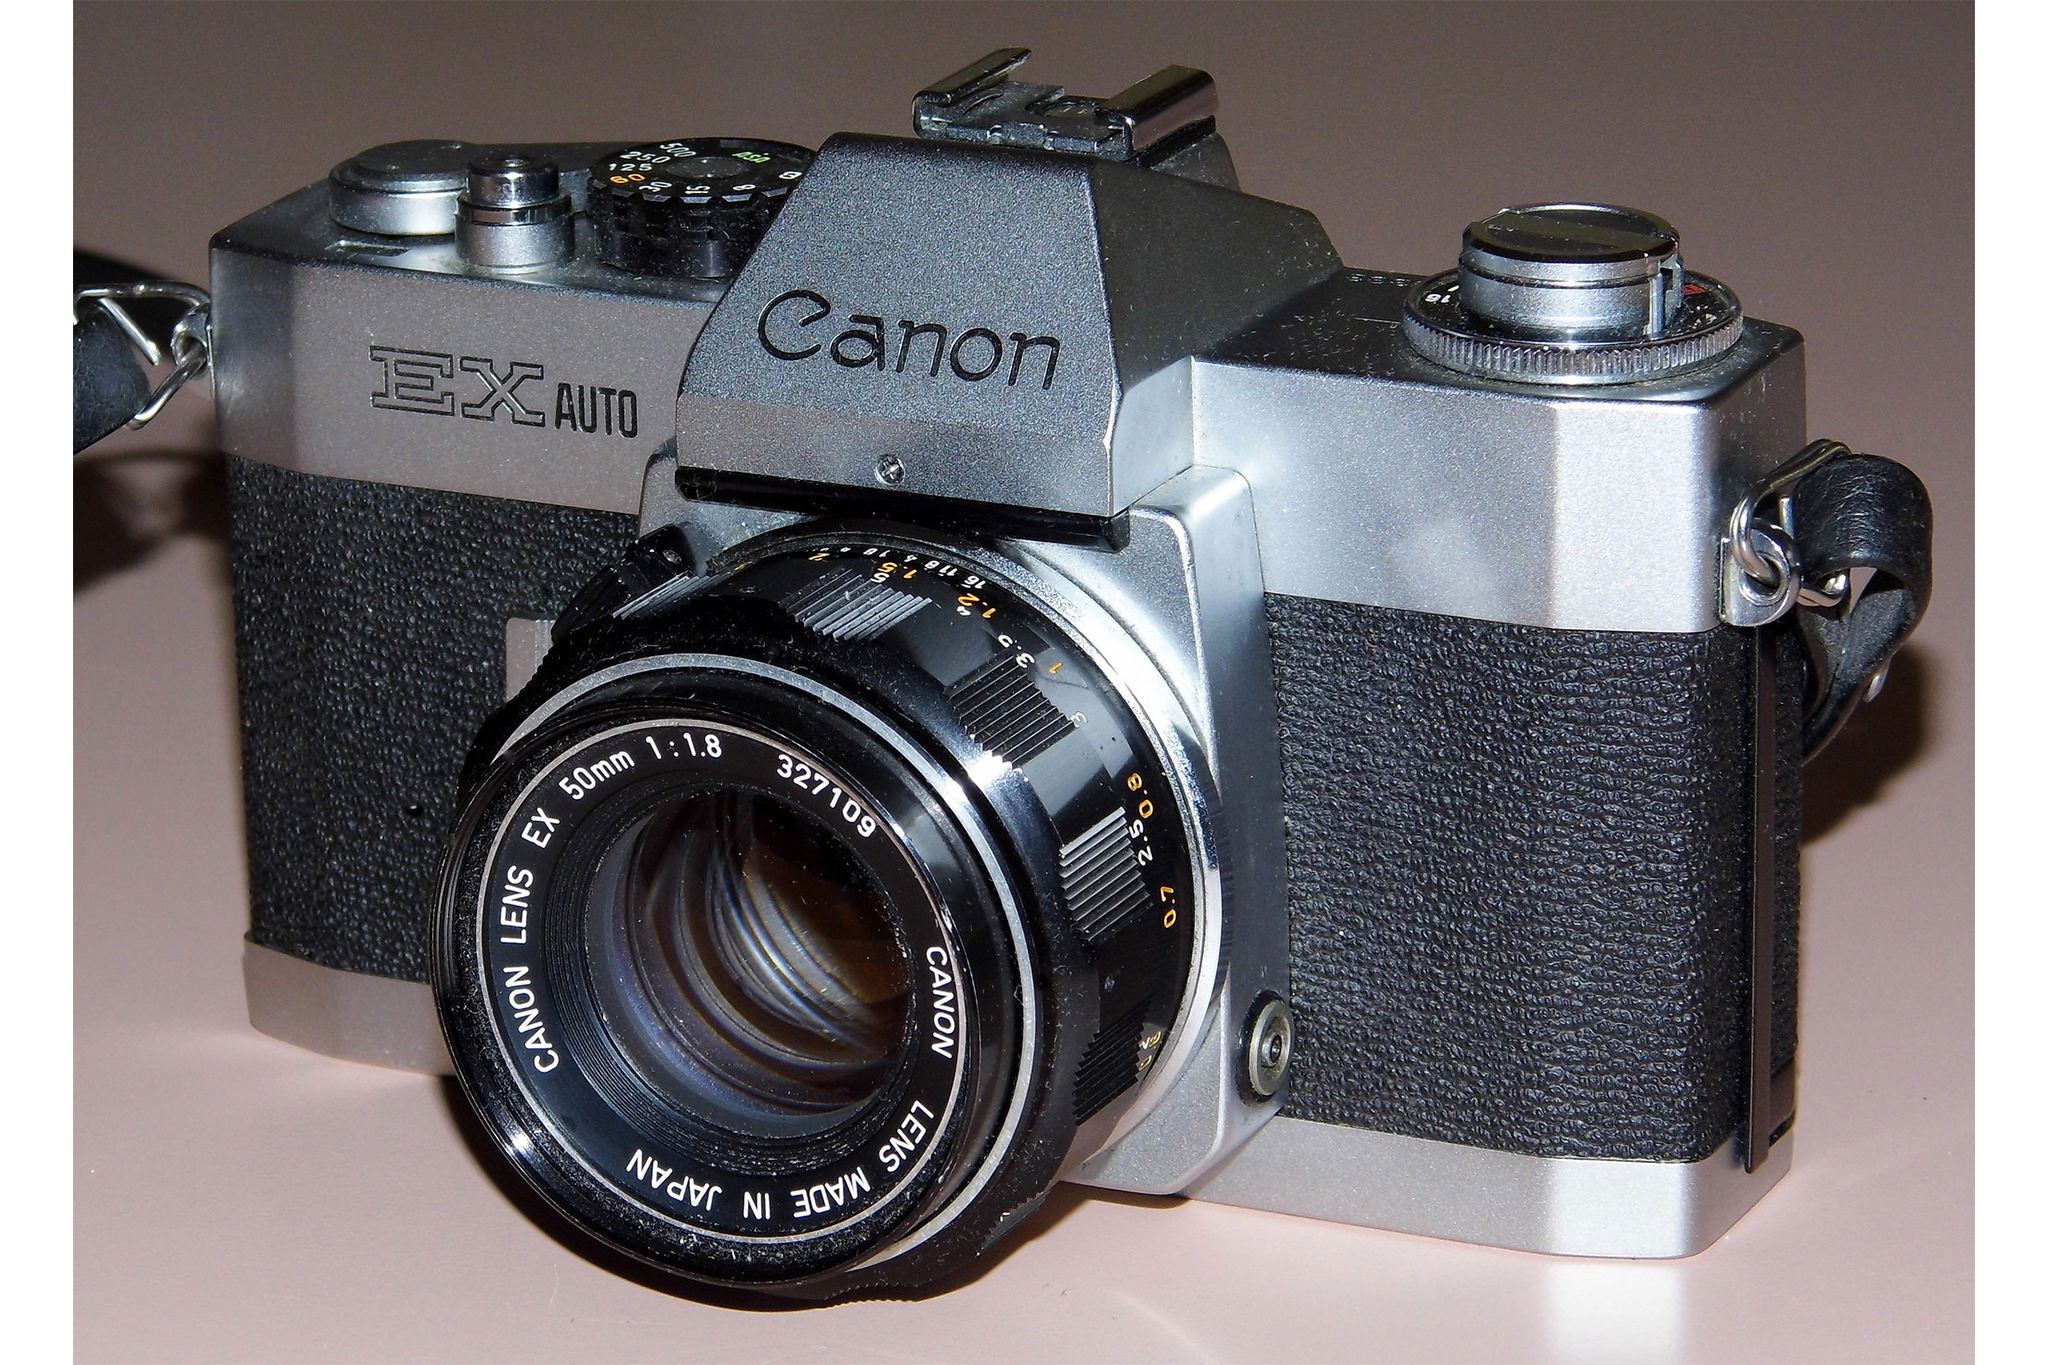 Canon EX AUTO - Learn more about the 35mm camera